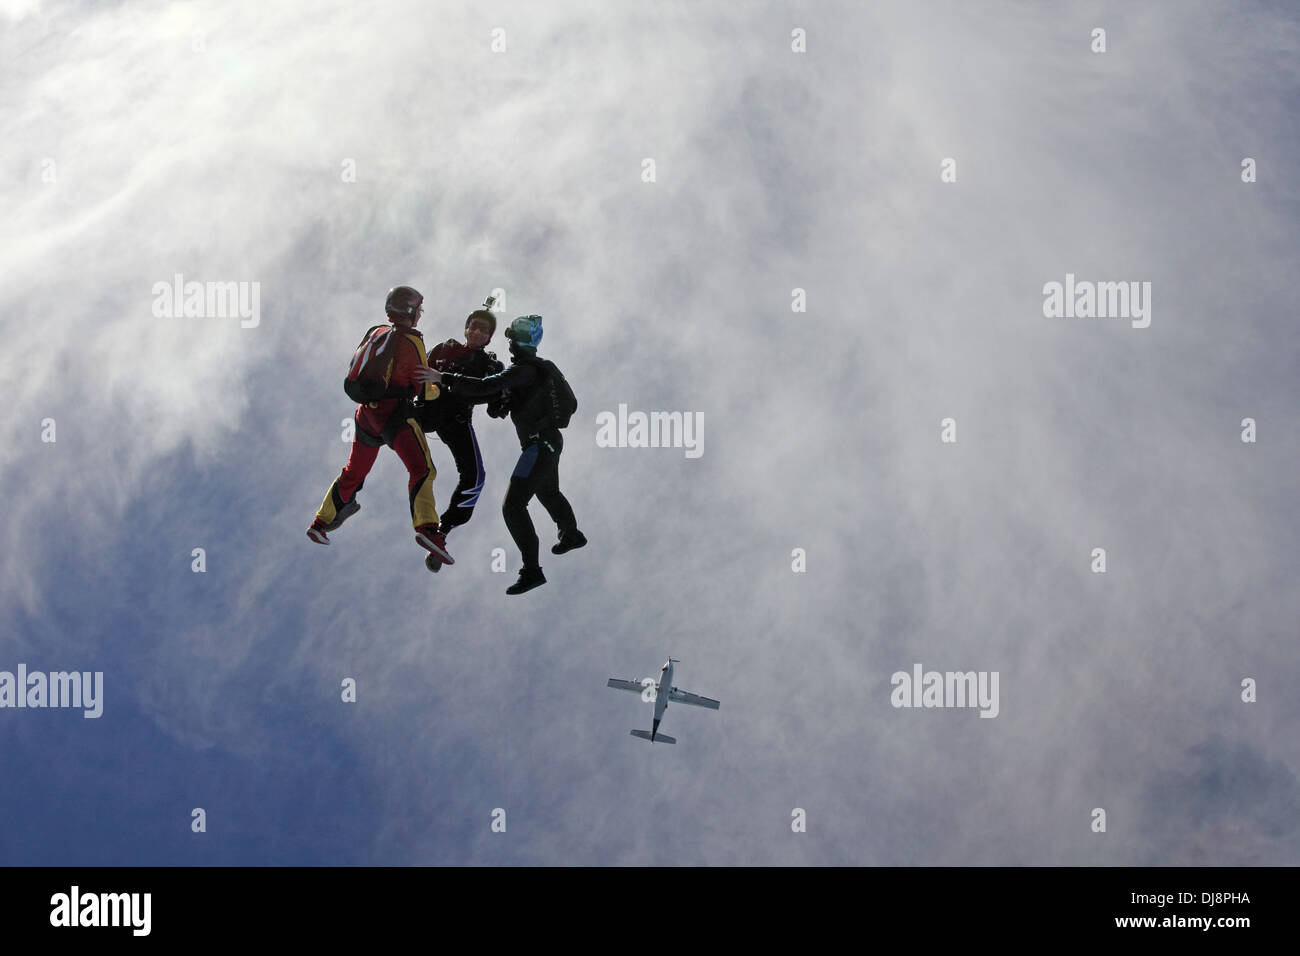 This freefly skydiving team jumped out of an aircraft and is holding hands together. It is fun for all to fly free in the sky. Stock Photo